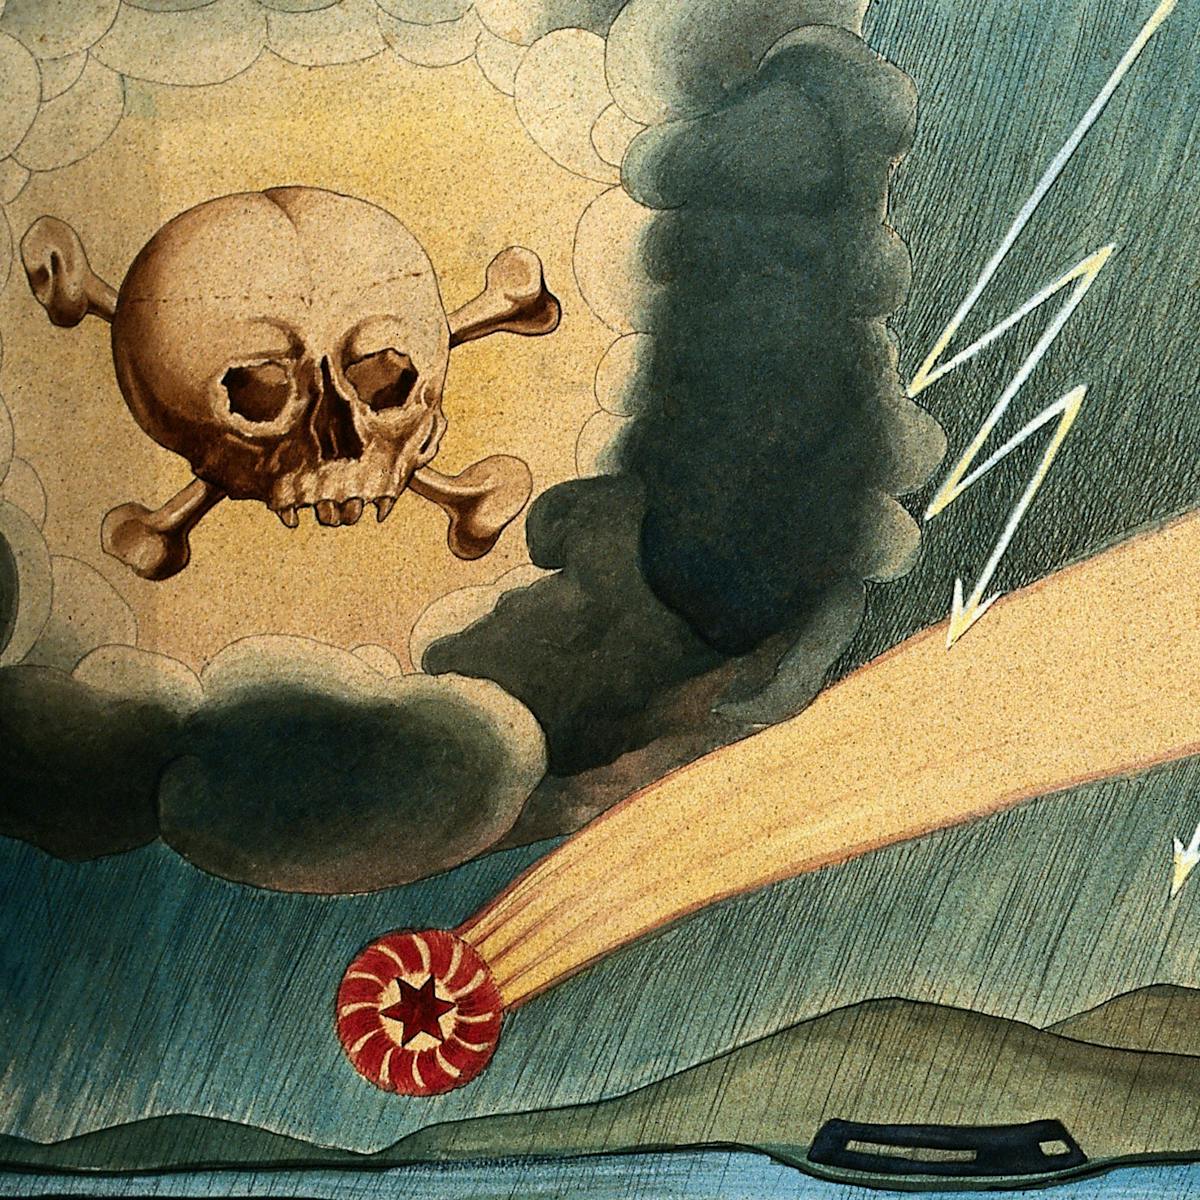 Thunder and lightning falling on a deserted landscape; left, a great skull and crossbones in the sky; centre, a falling star or asteroid; right, a bier in the sky with marked with the heads of three Orientals.